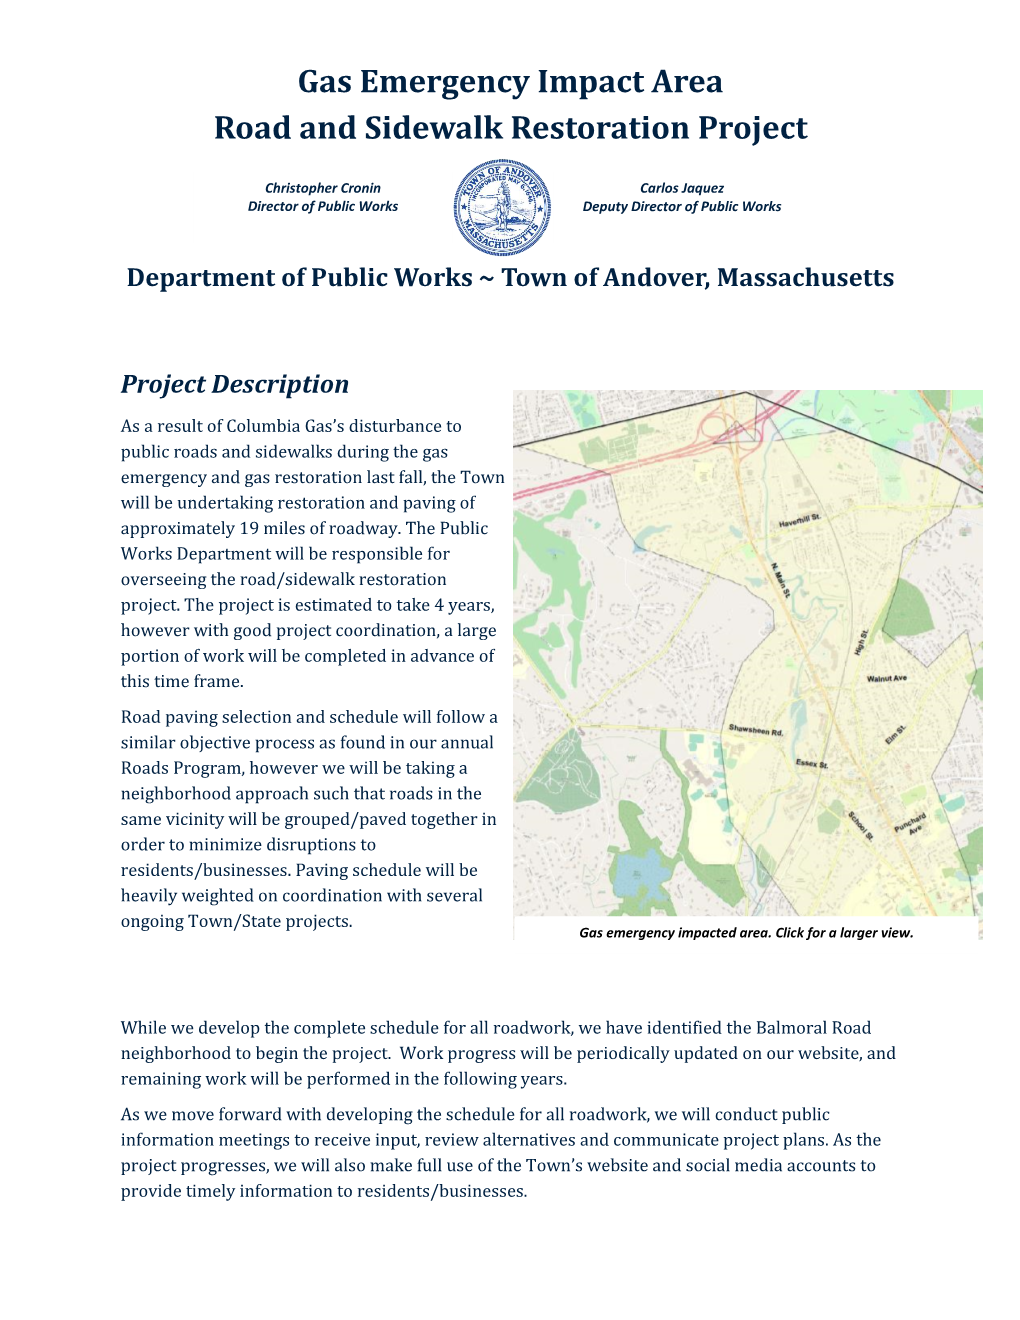 Gas Emergency Impact Area Road and Sidewalk Restoration Project